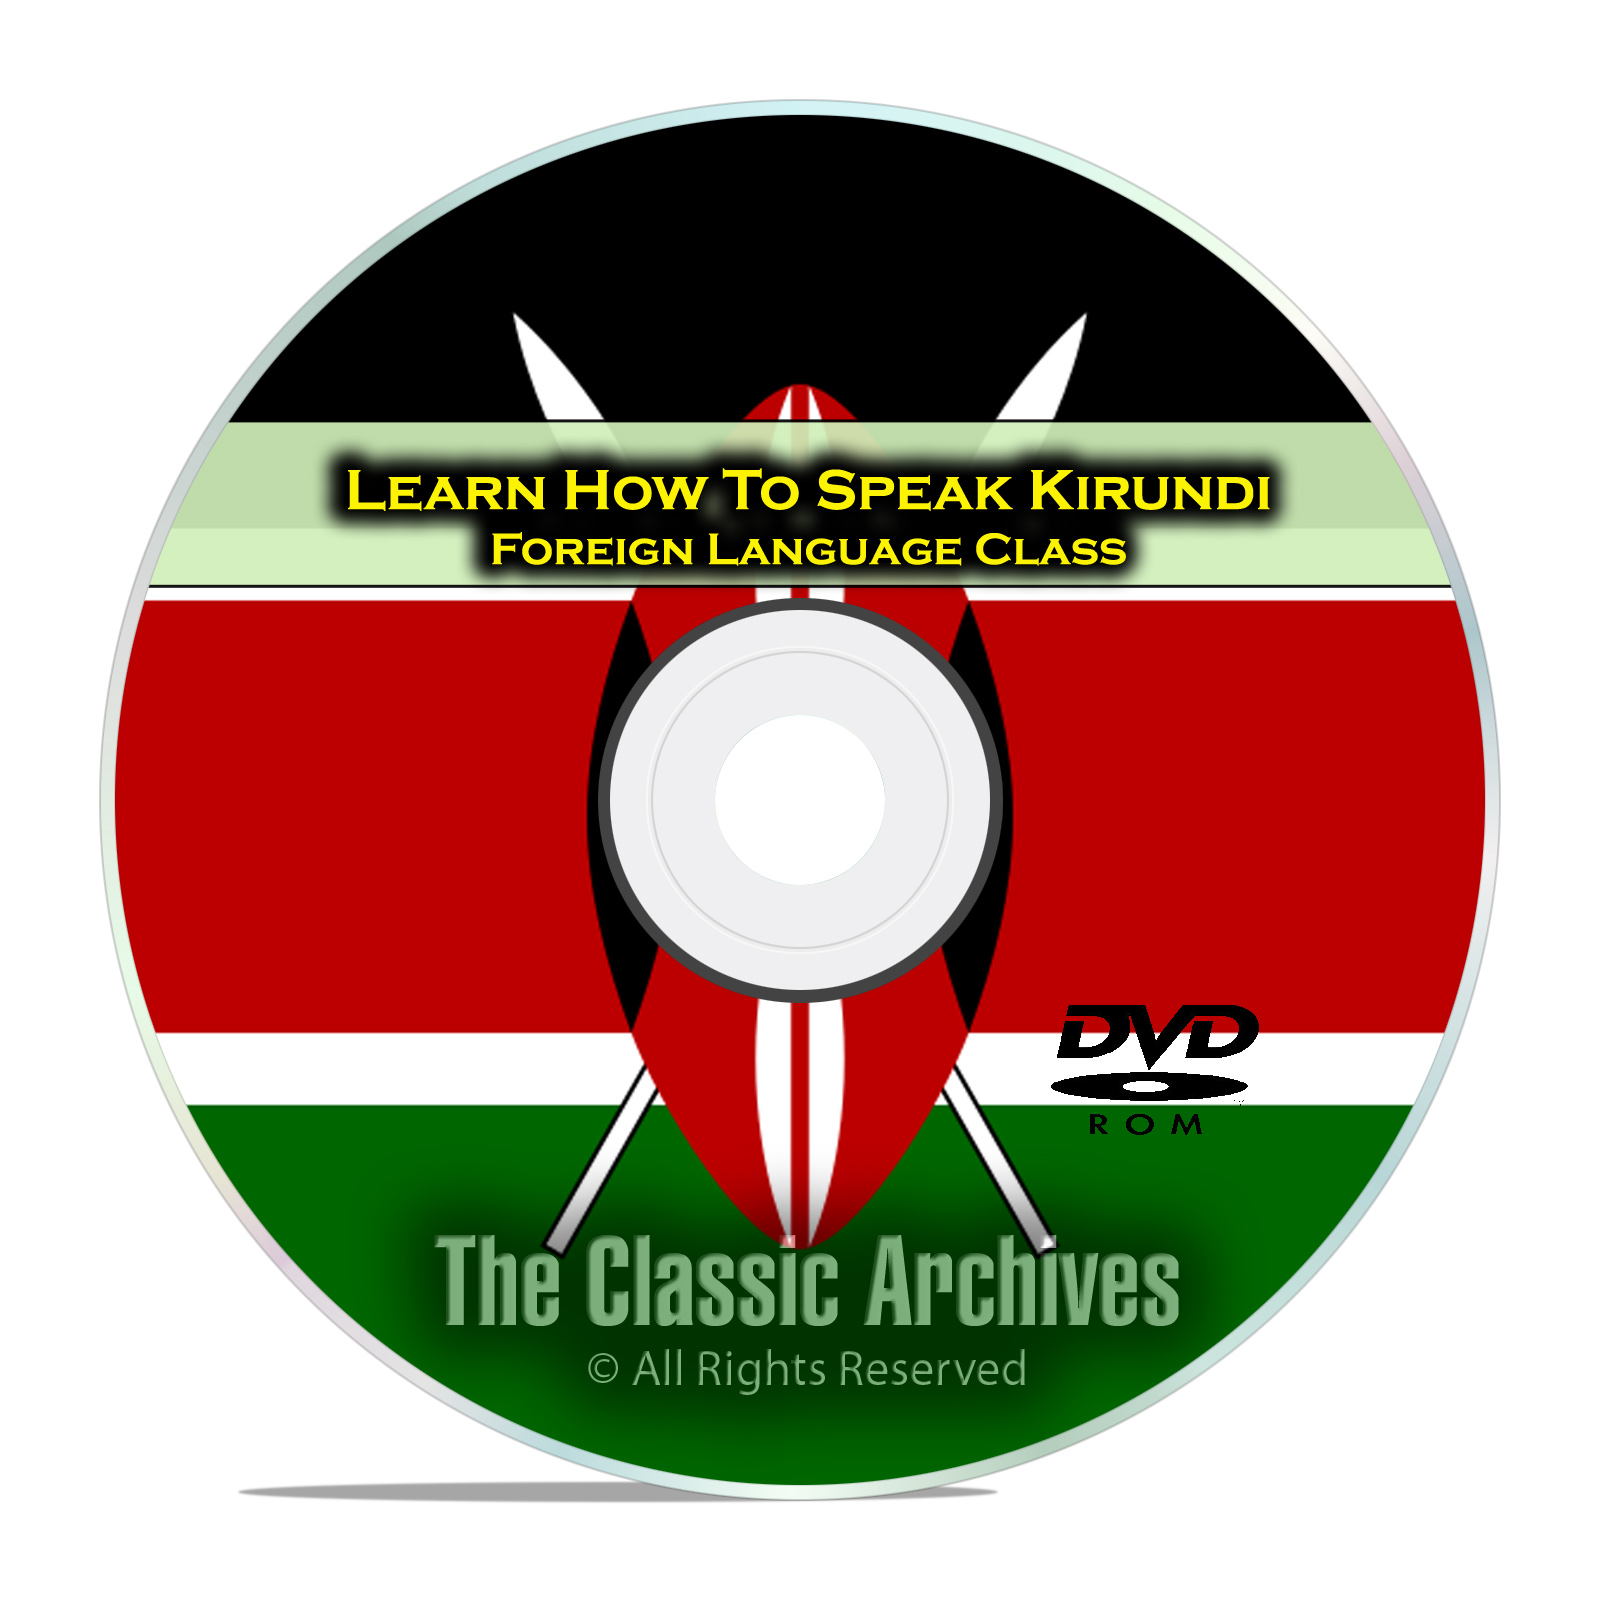 Learn How To Speak Kirundi, Fast Foreign Language Training Course, DVD